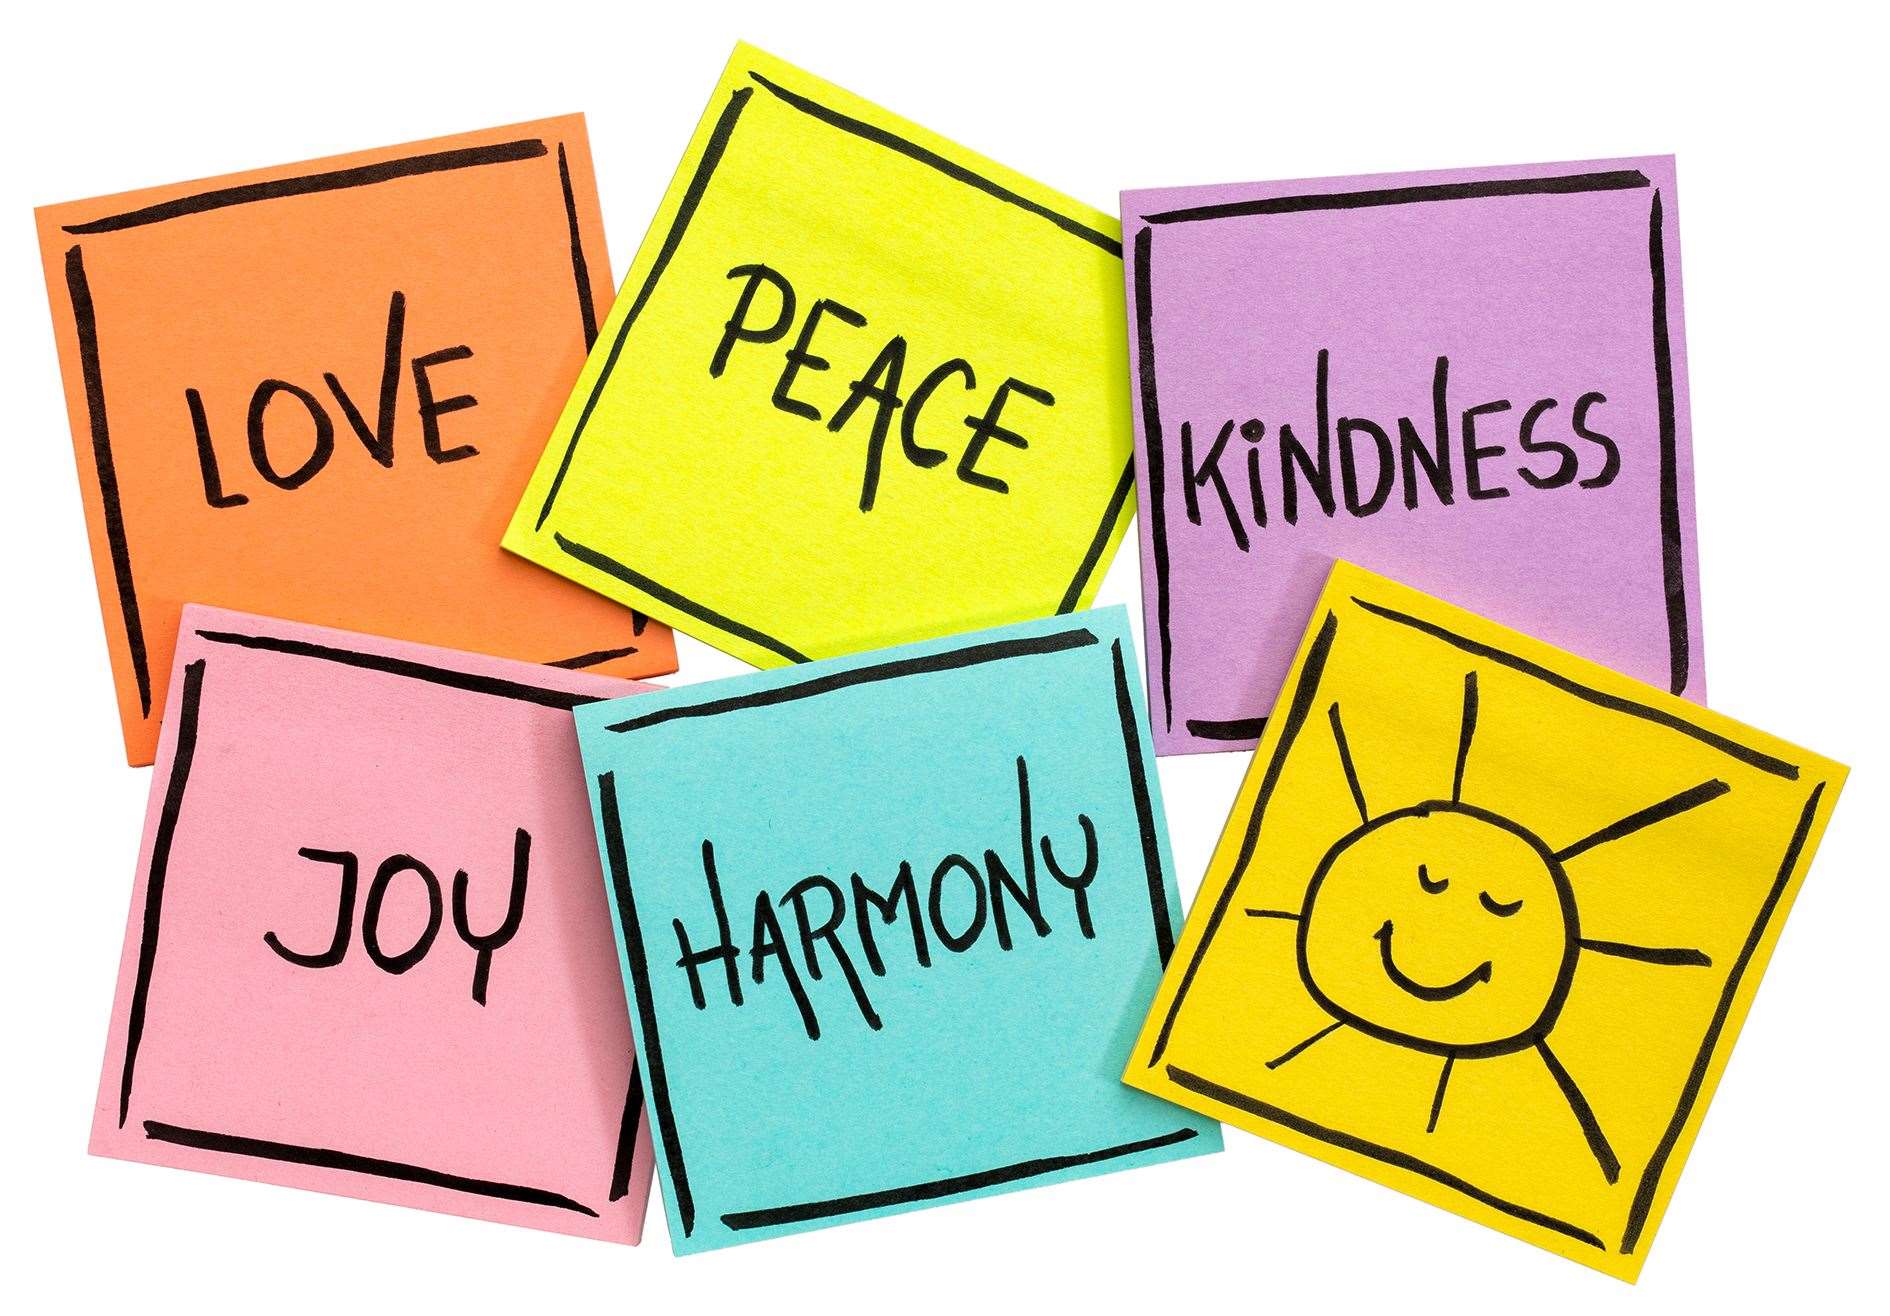 love, peace, kindness, joy and harmony with sun smiley - isolated set of sticky notes with inspirational words